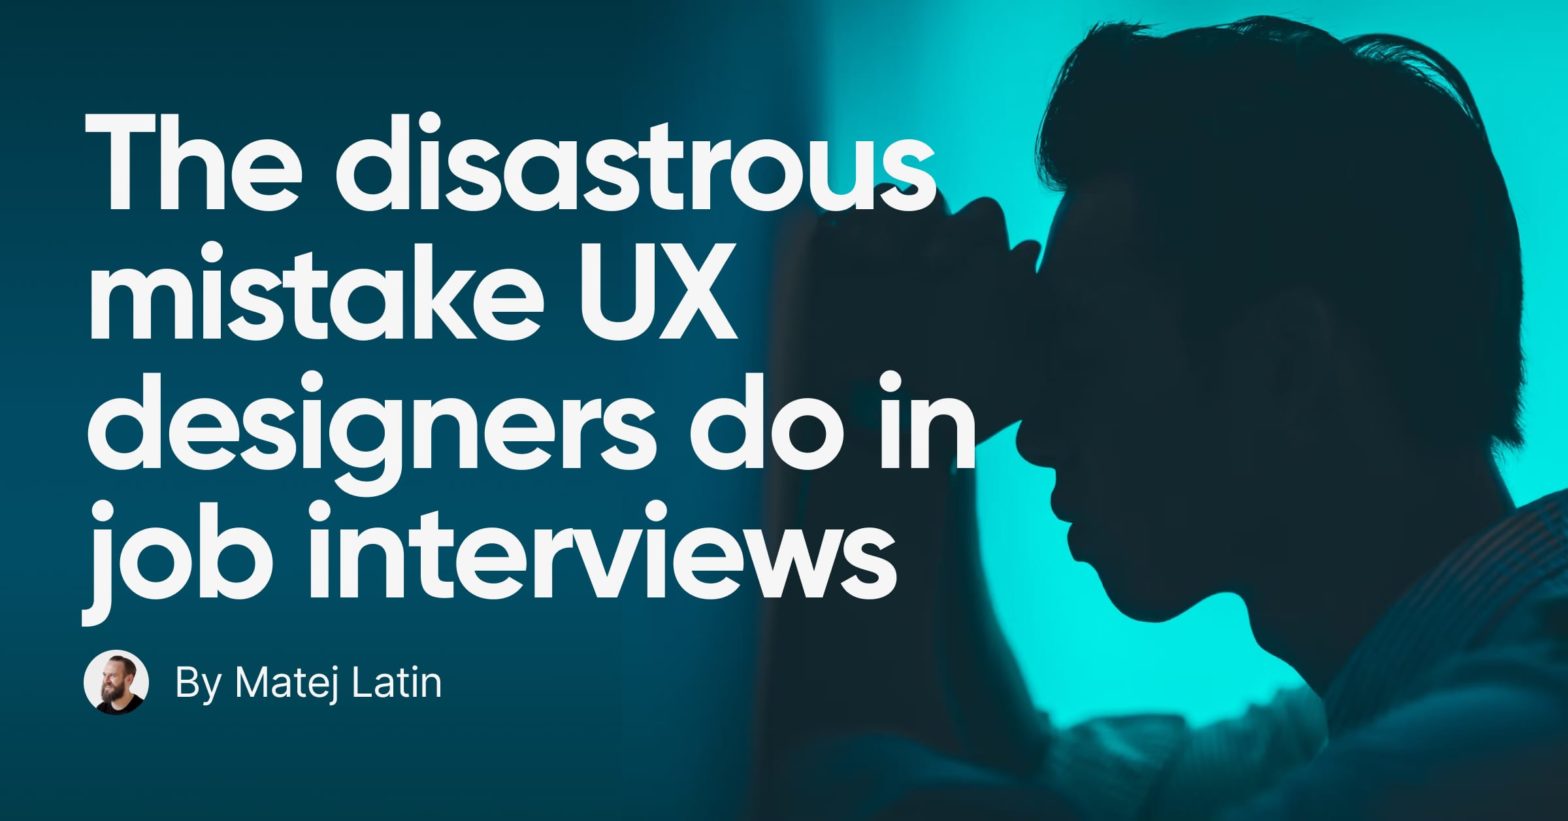 The disastrous mistake UX designers do in job interviews